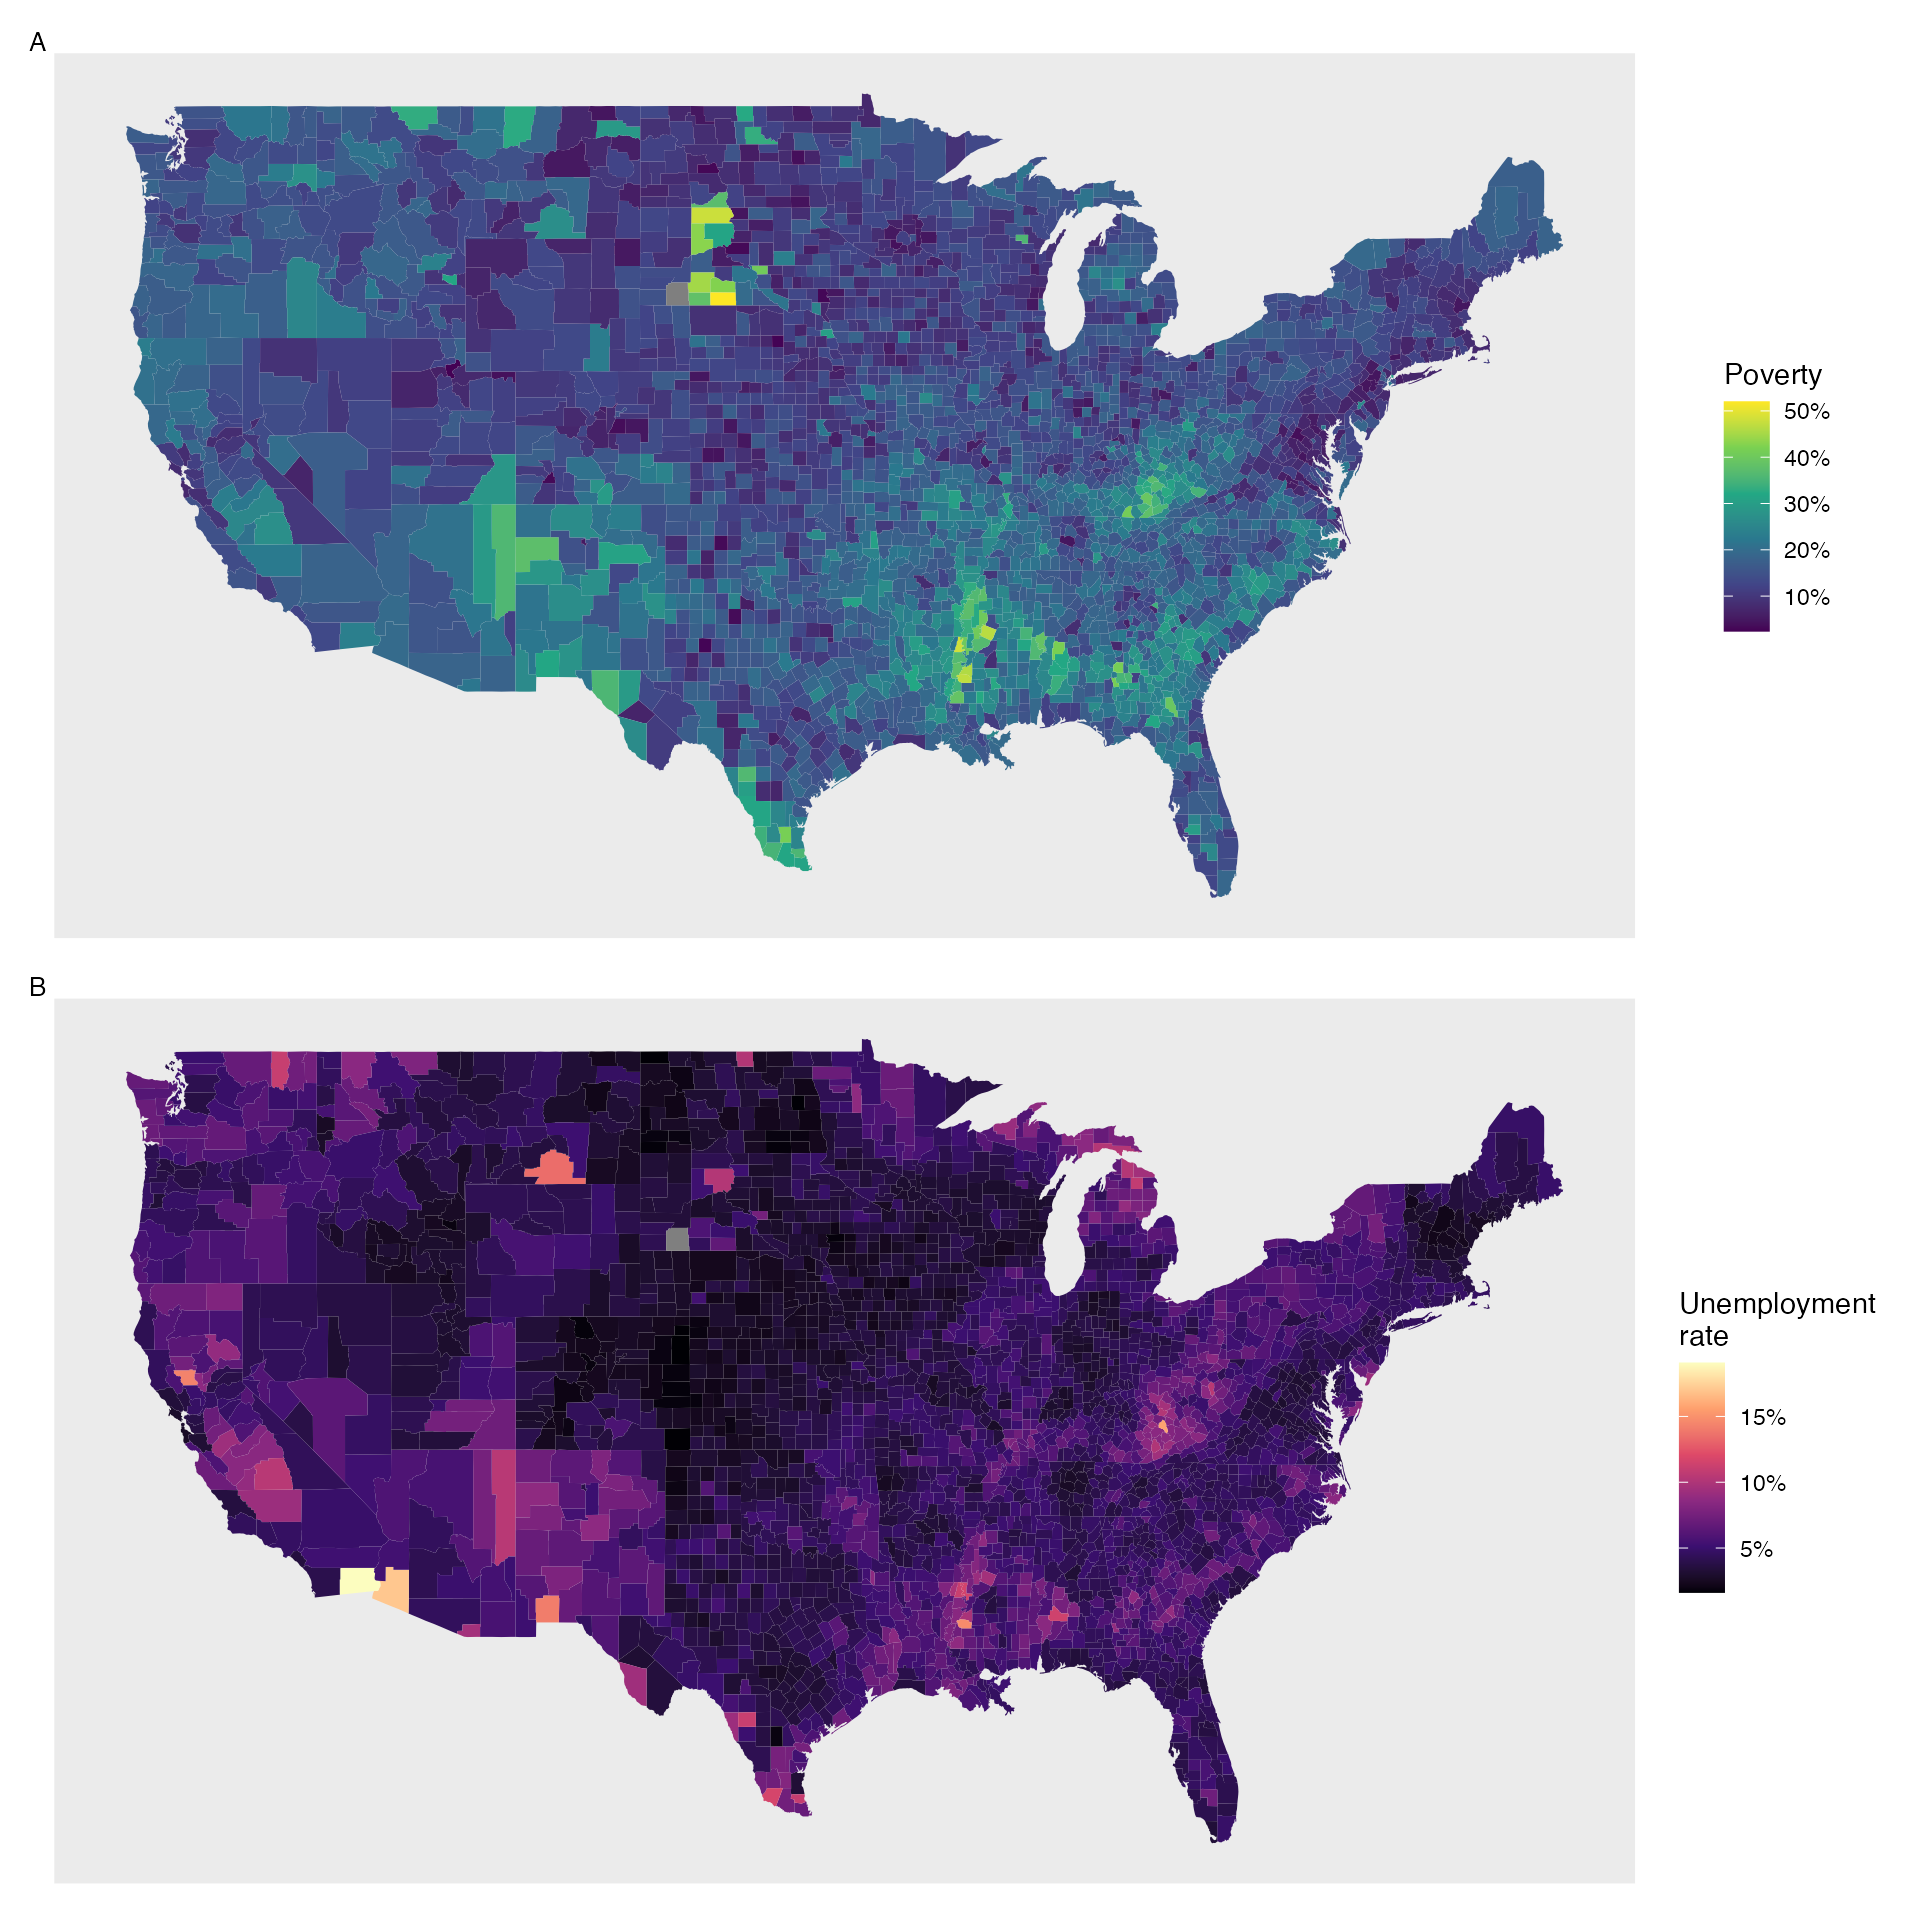 Plot A: Intensity map of poverty rate (percent). Plot B: Intensity map of the unemployment rate (percent).